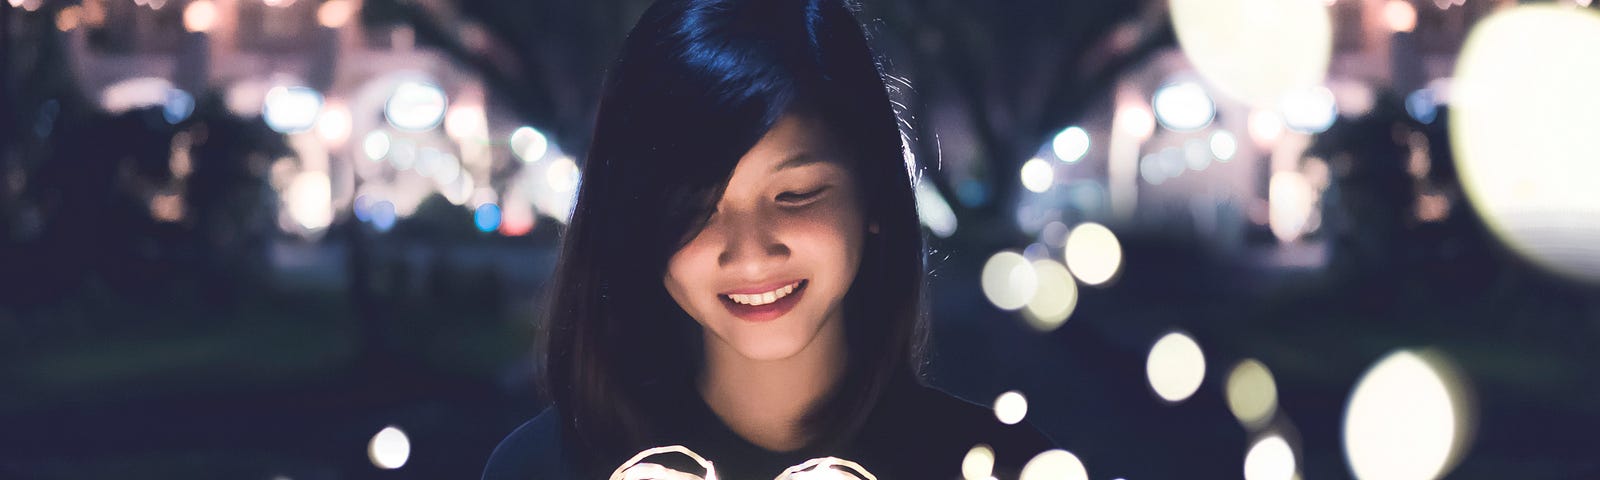 A young woman holding up a lighted white heart with lights around her in the background